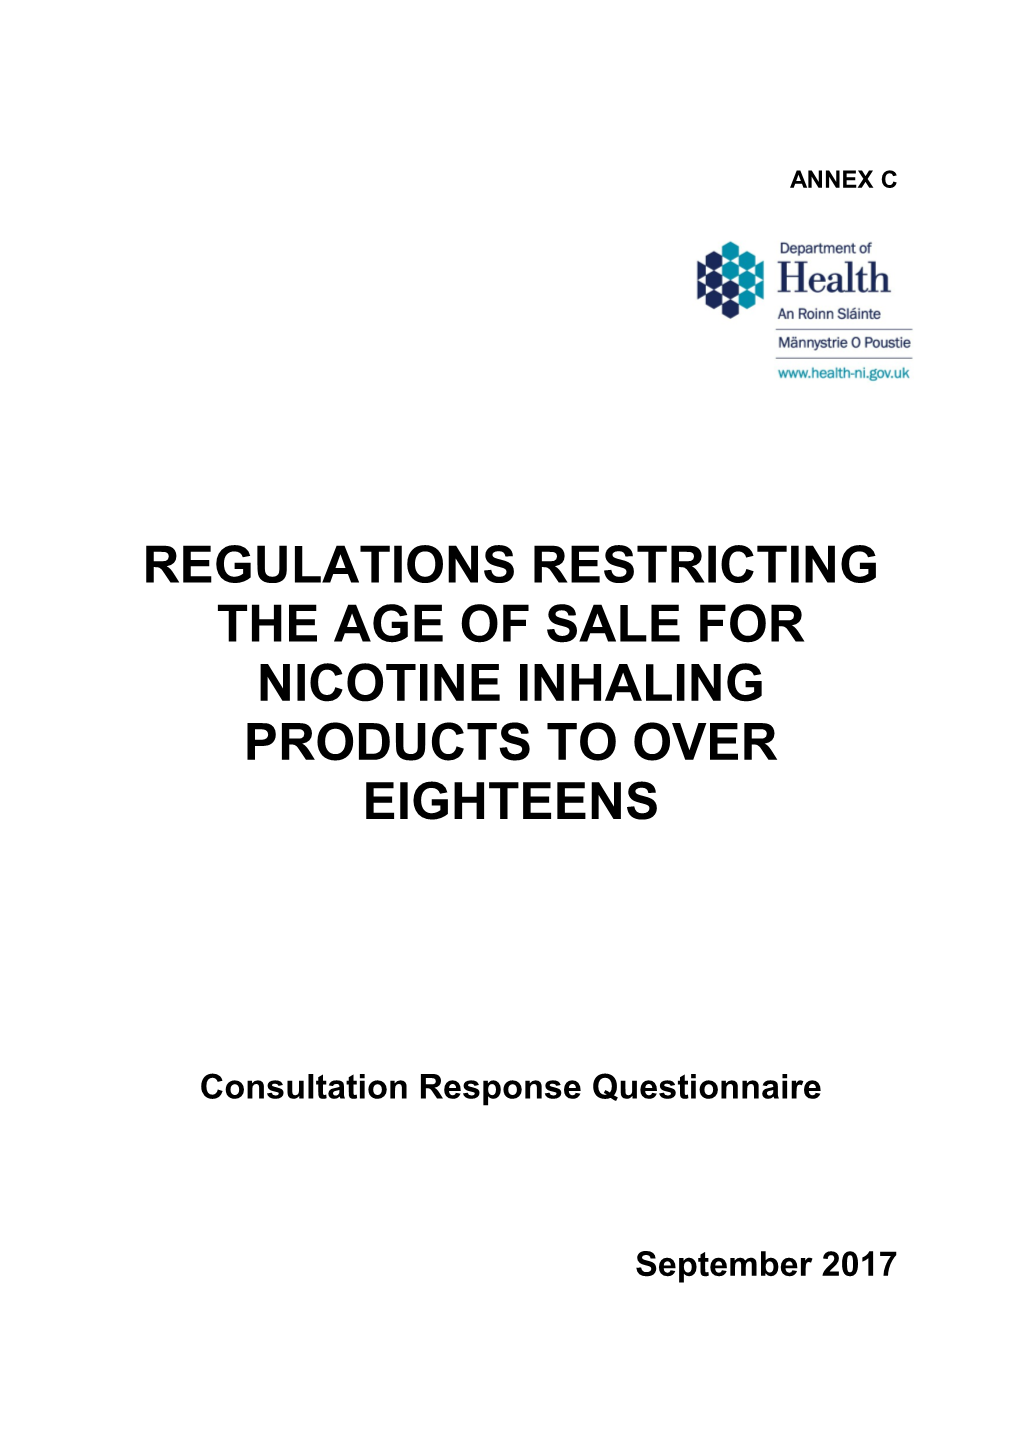 Regulations Restricting the Age of Sale for Nicotine Inhaling Products to Over Eighteens